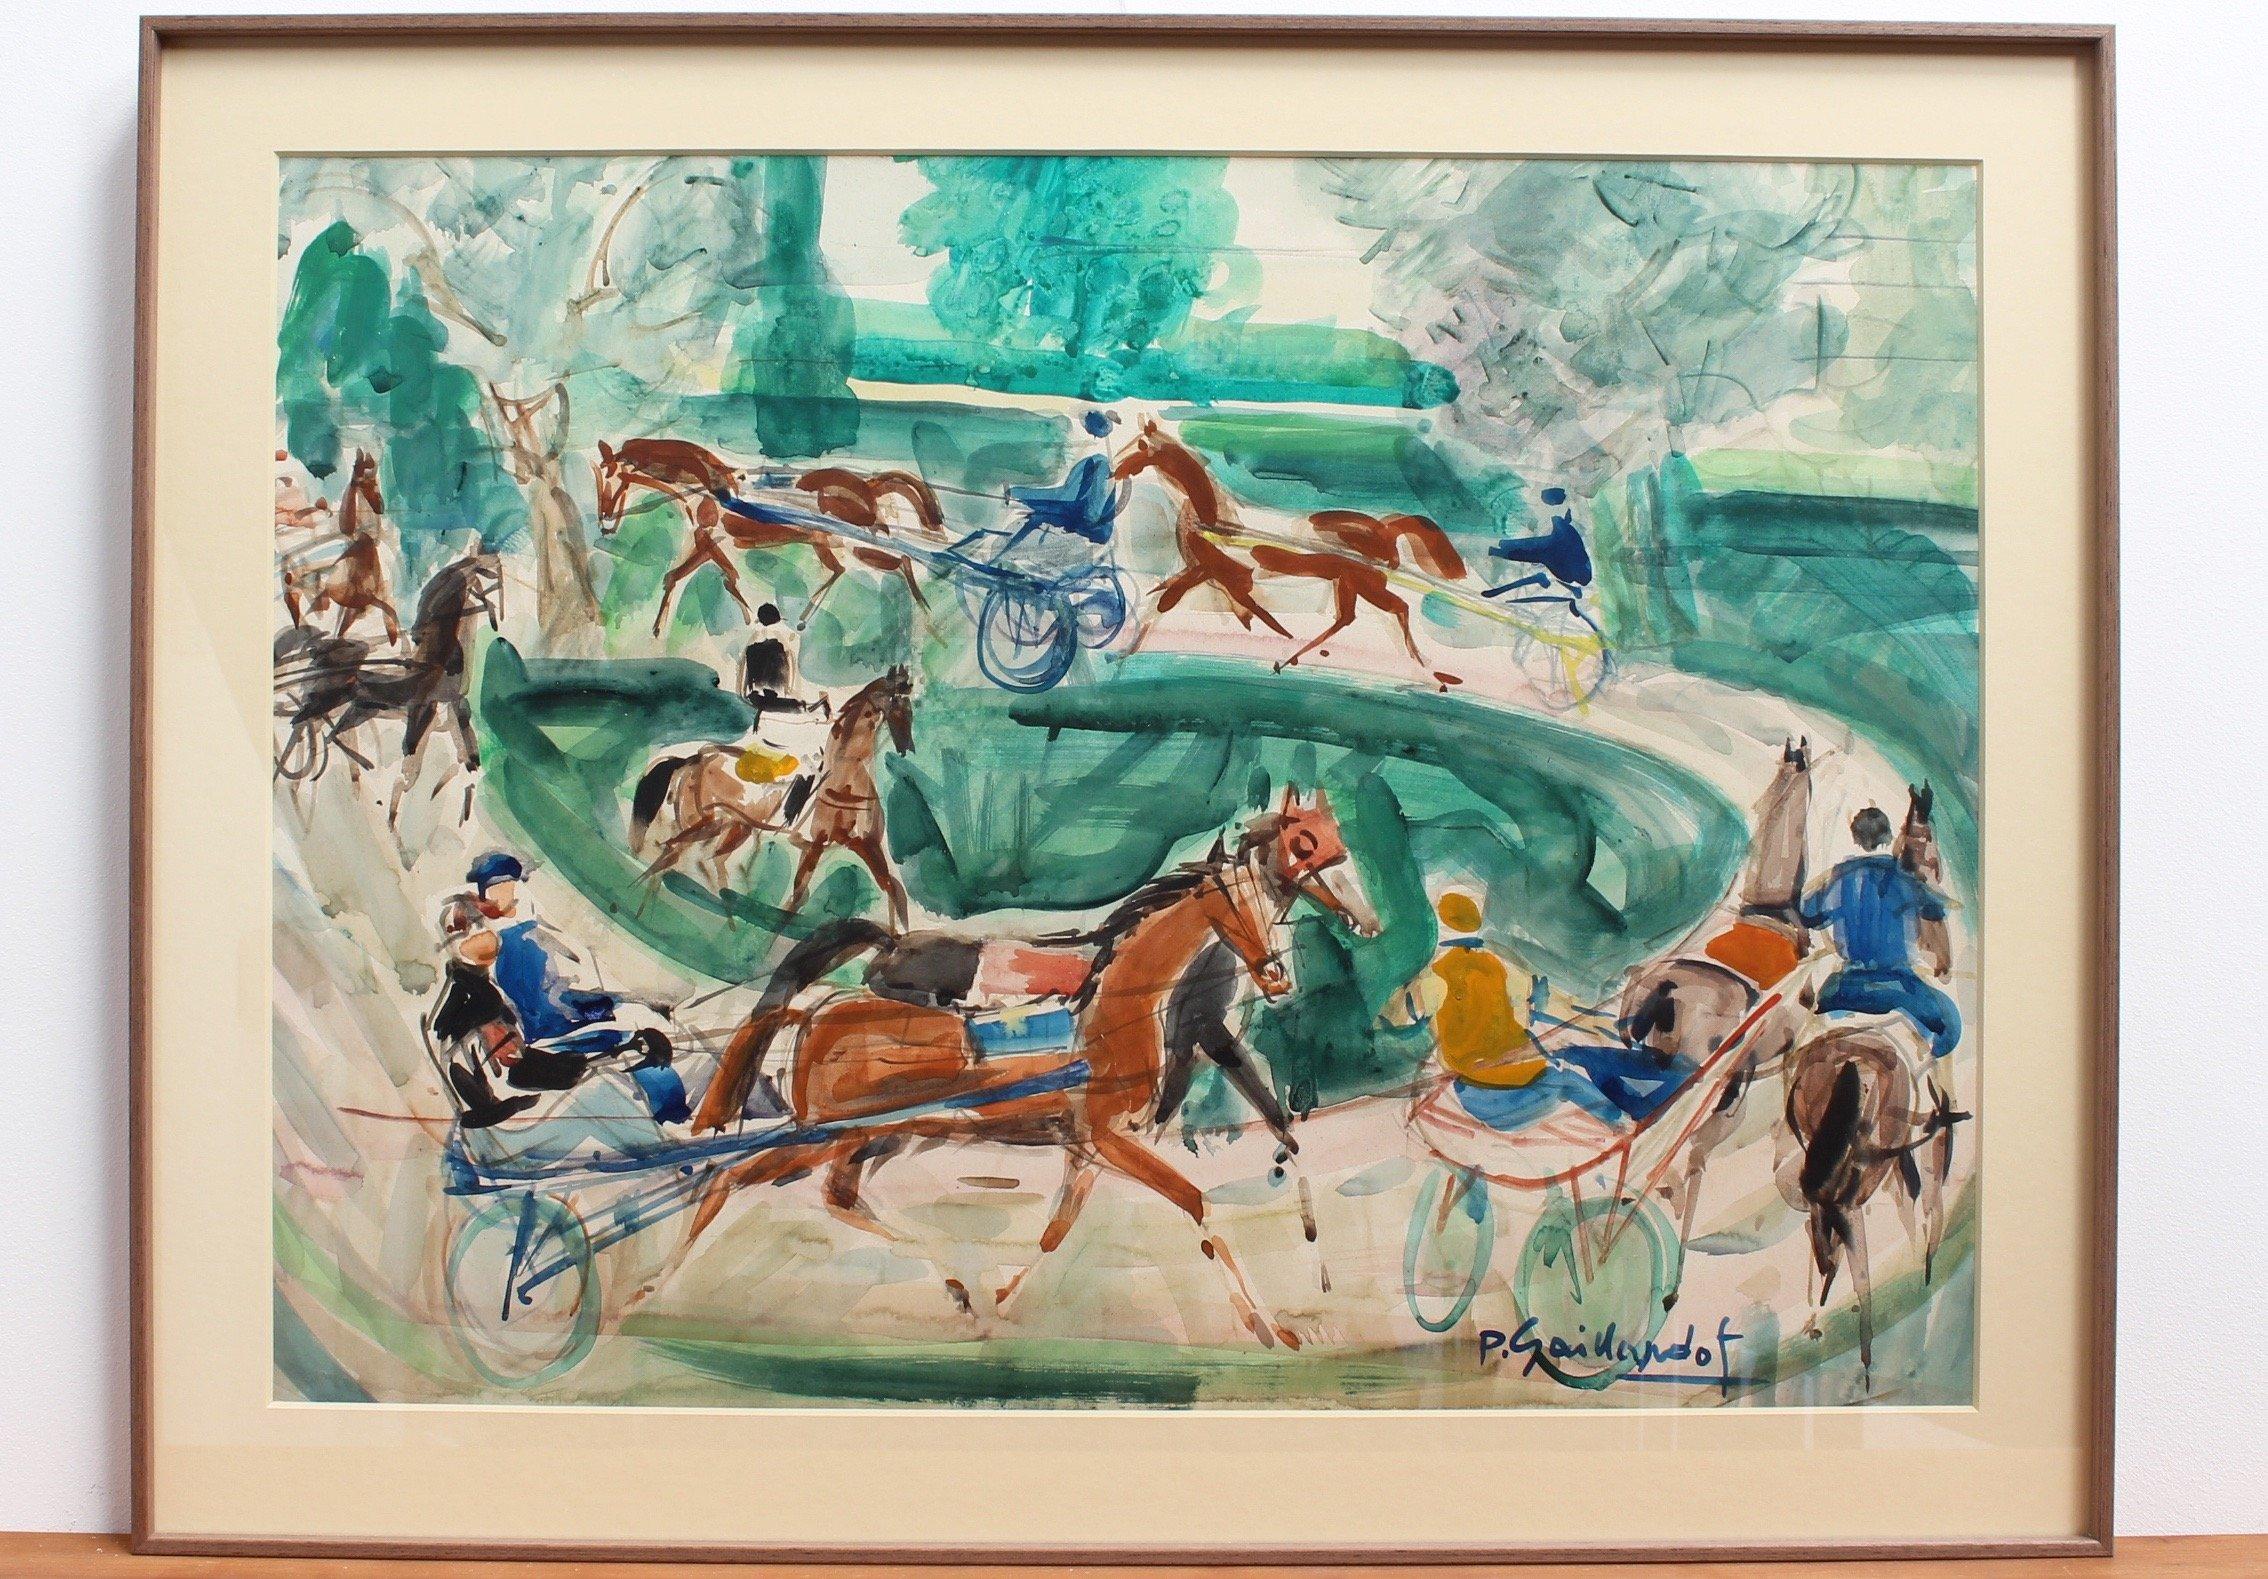 A Day at the Deauville Racetrack - Art by Pierre Gaillardot 